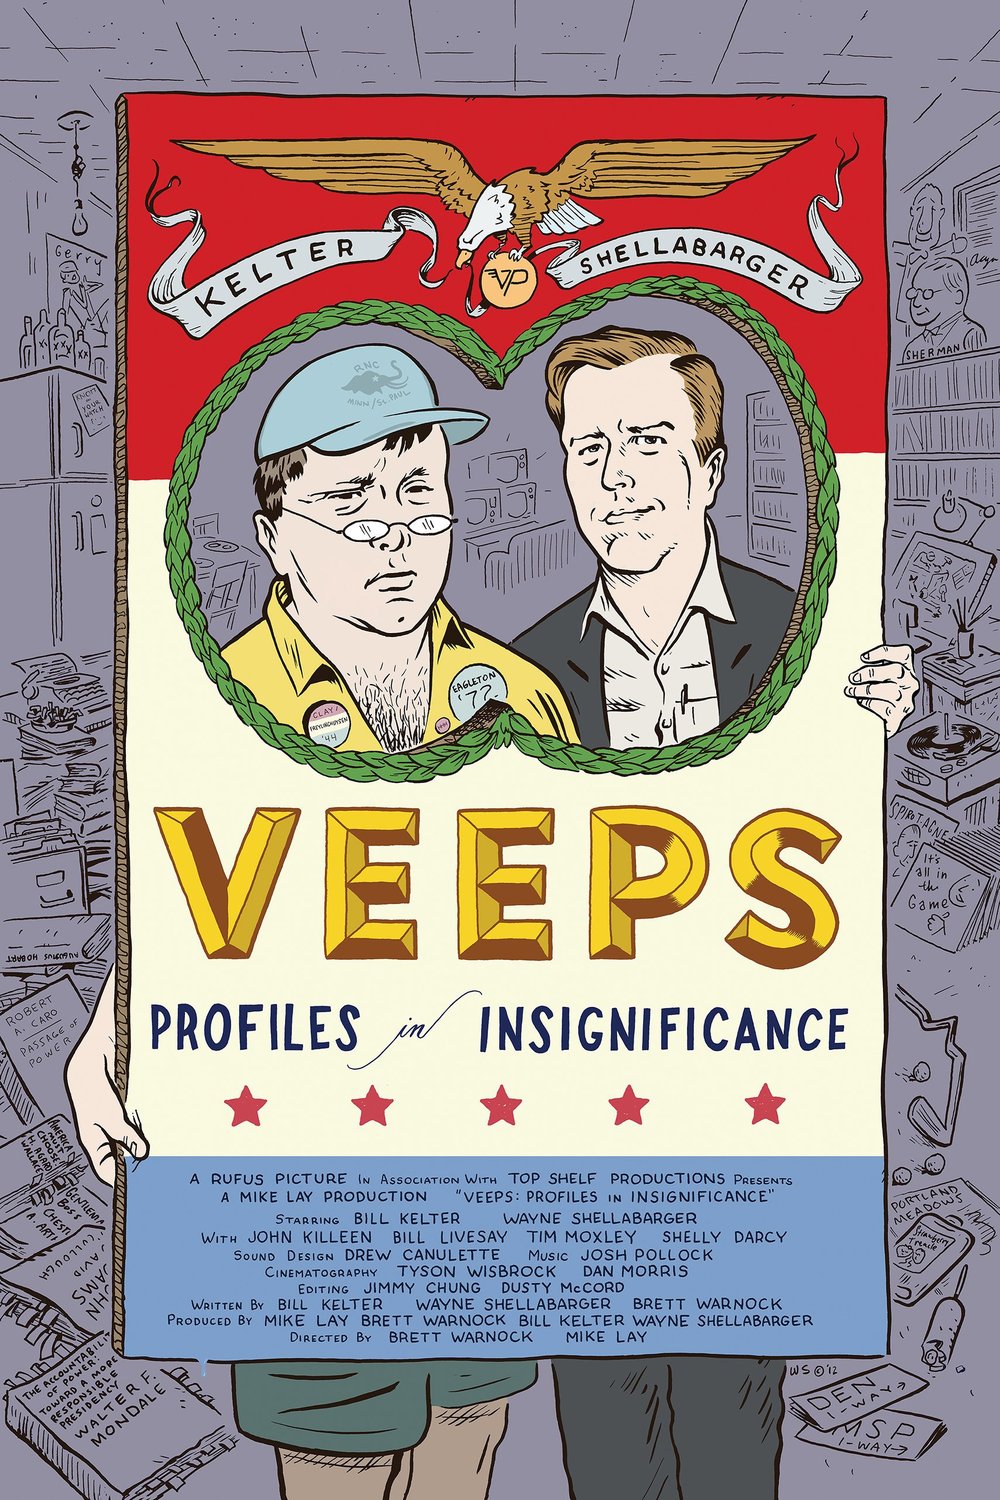 Poster of the movie Veeps